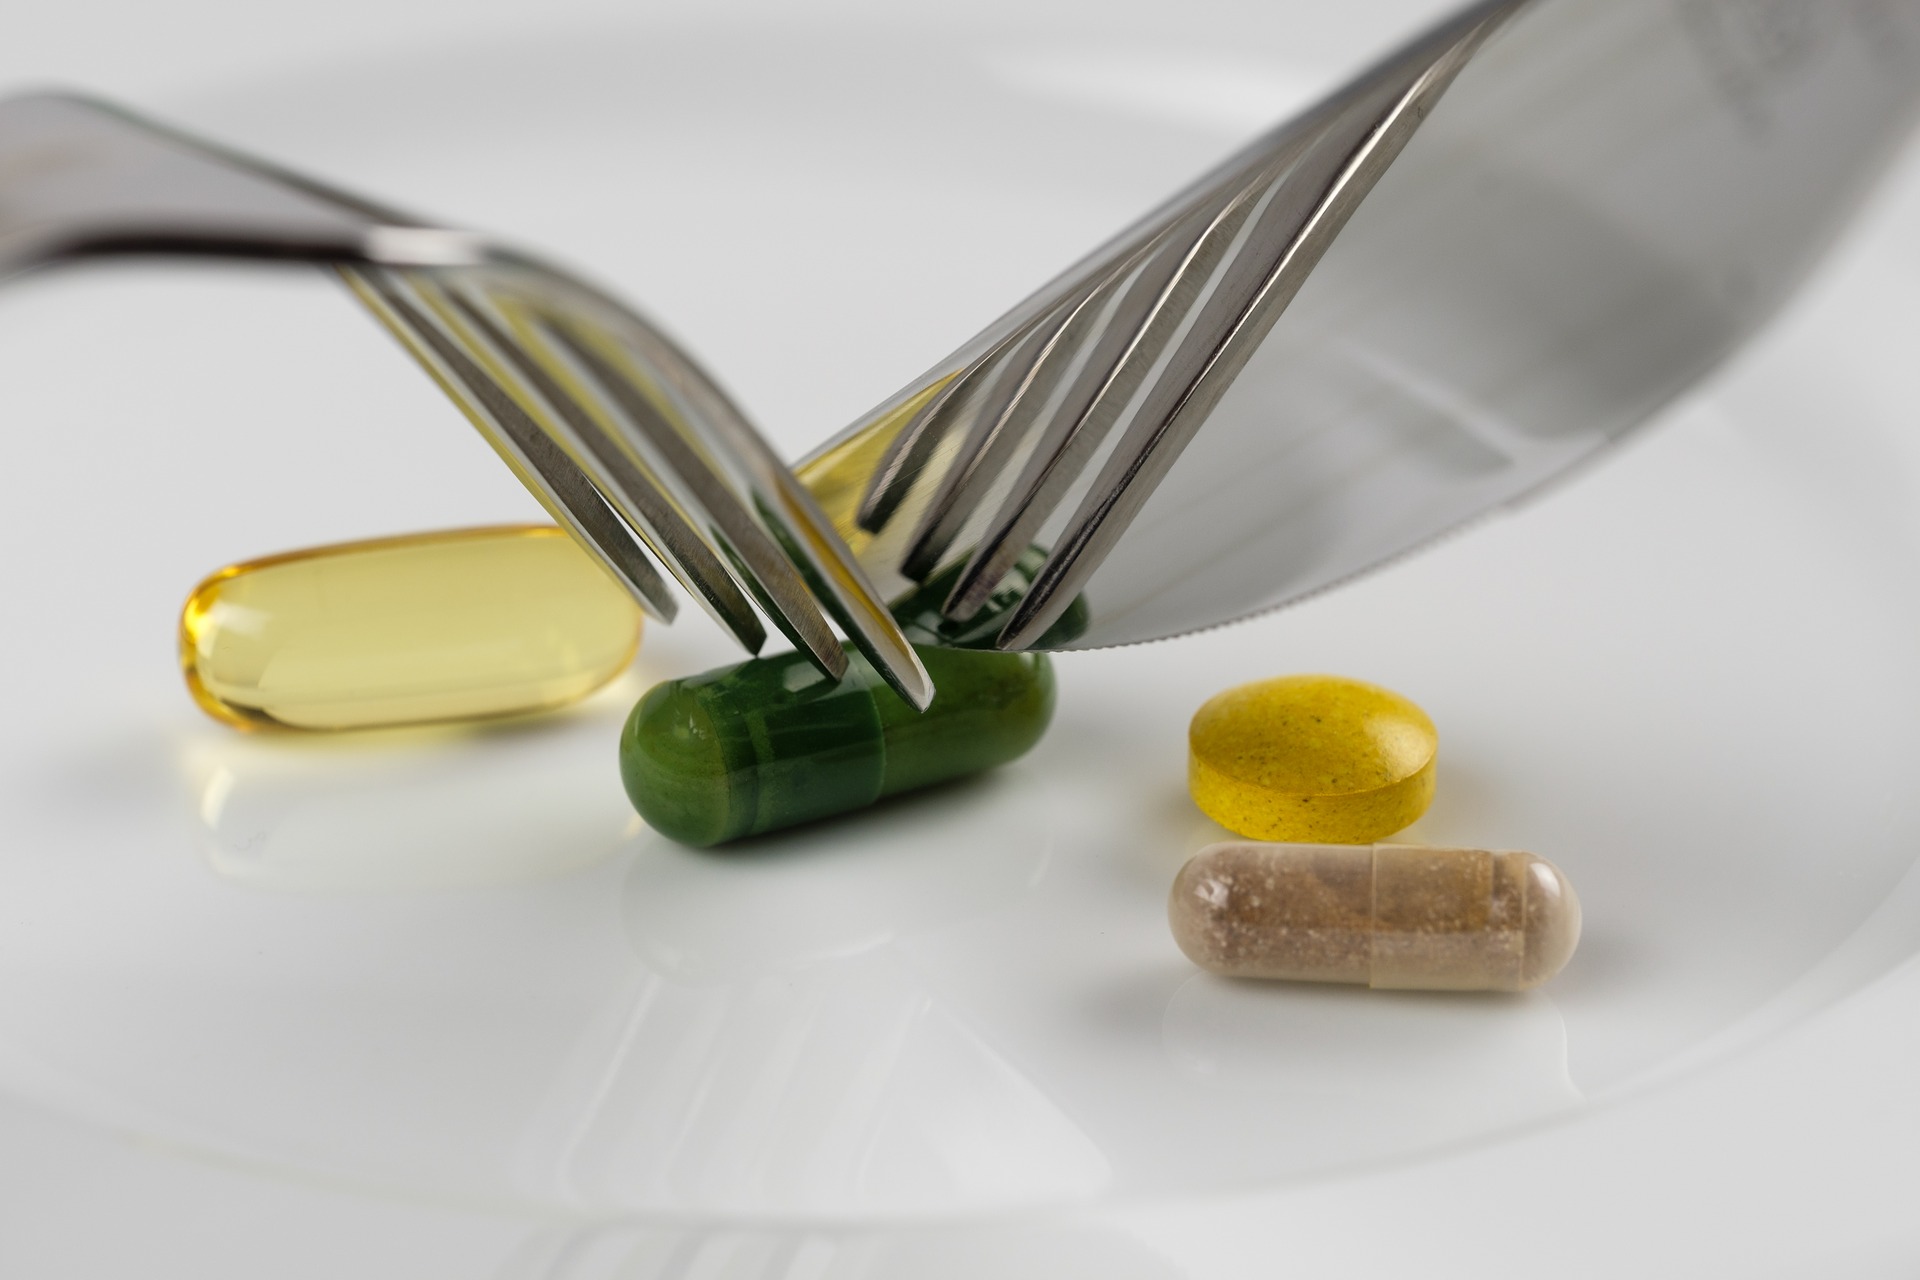 Considerations When Taking Supplements